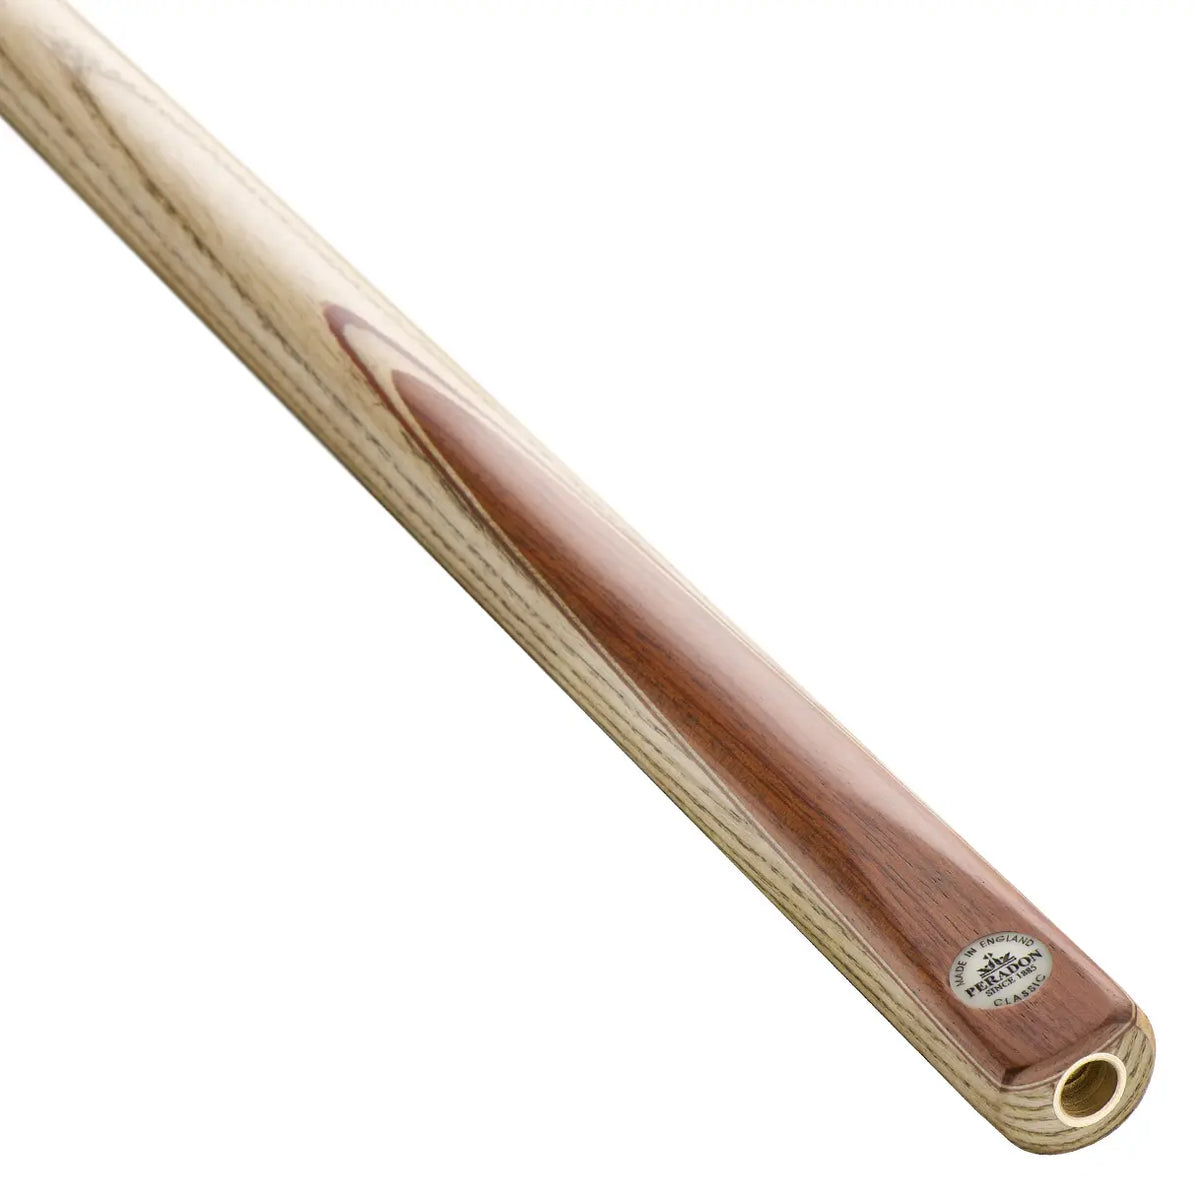 Peradon Classic Two Piece Snooker Cue. Butt view